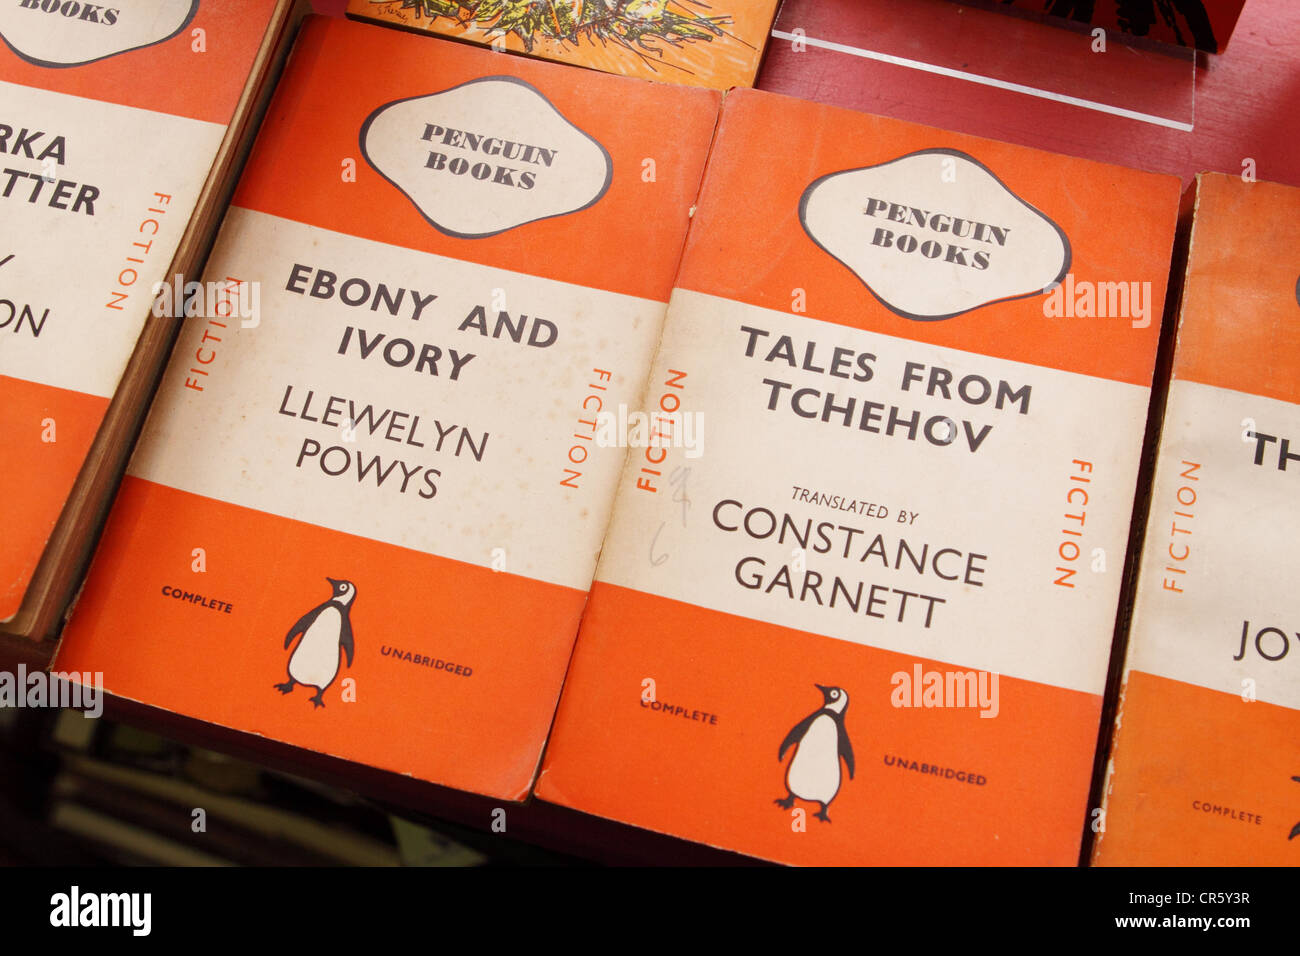 Hay On Wye secondhand old Penguin books for sale Stock Photo